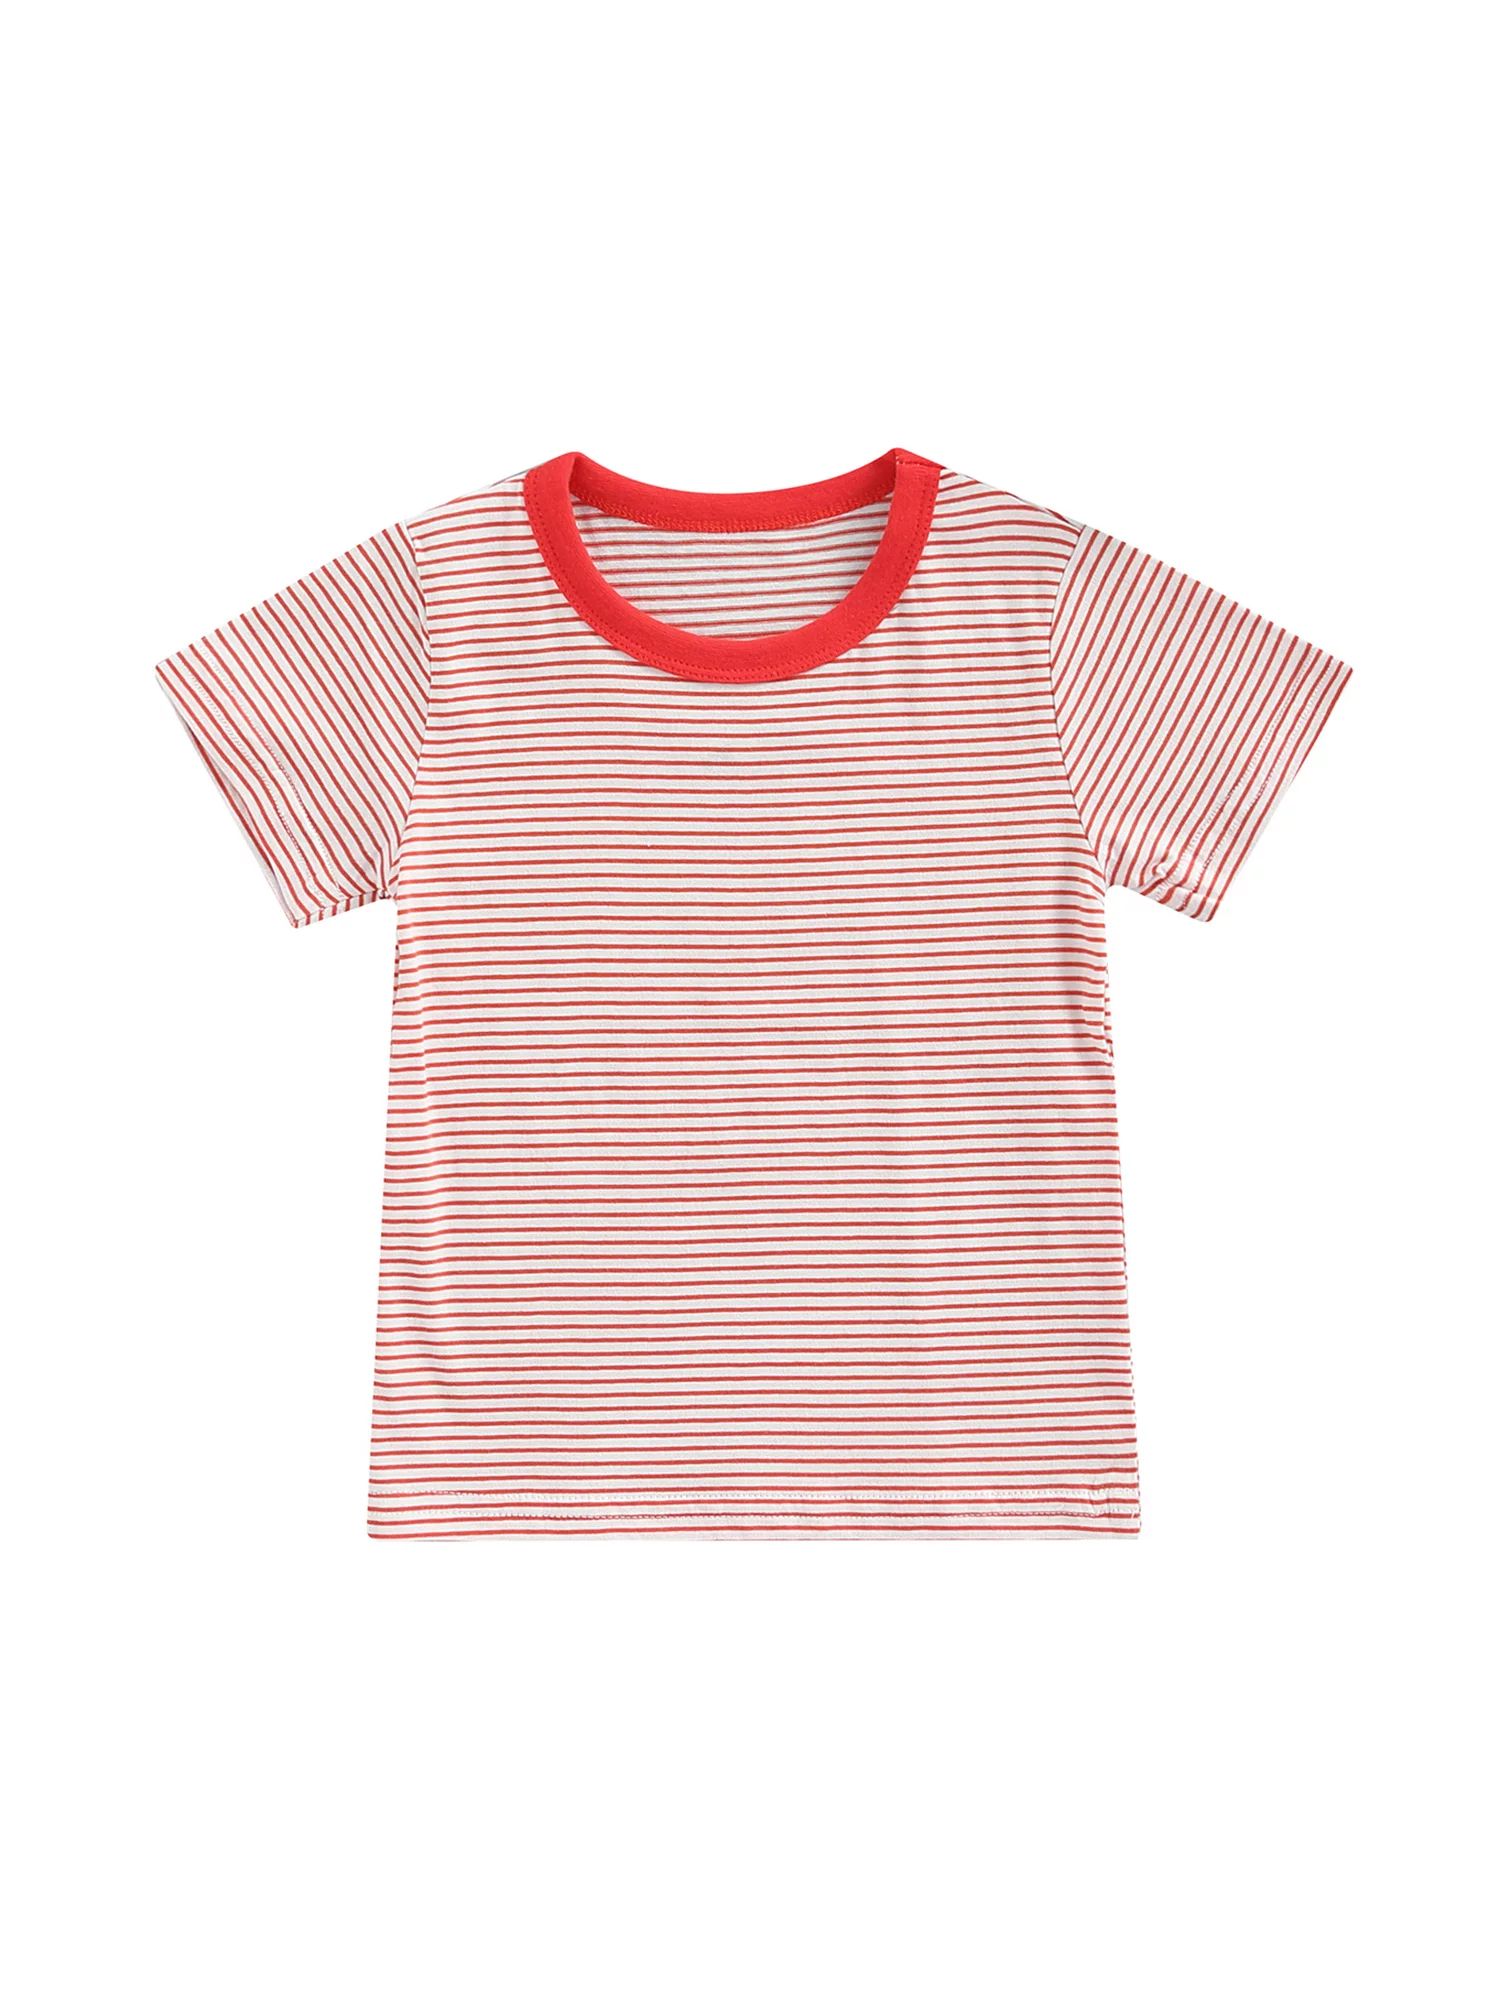 TheFound Toddler Baby Boy Girl T-Shirt Striped Short Sleeve Casual Tops Pullover Summer Clothes | Walmart (US)